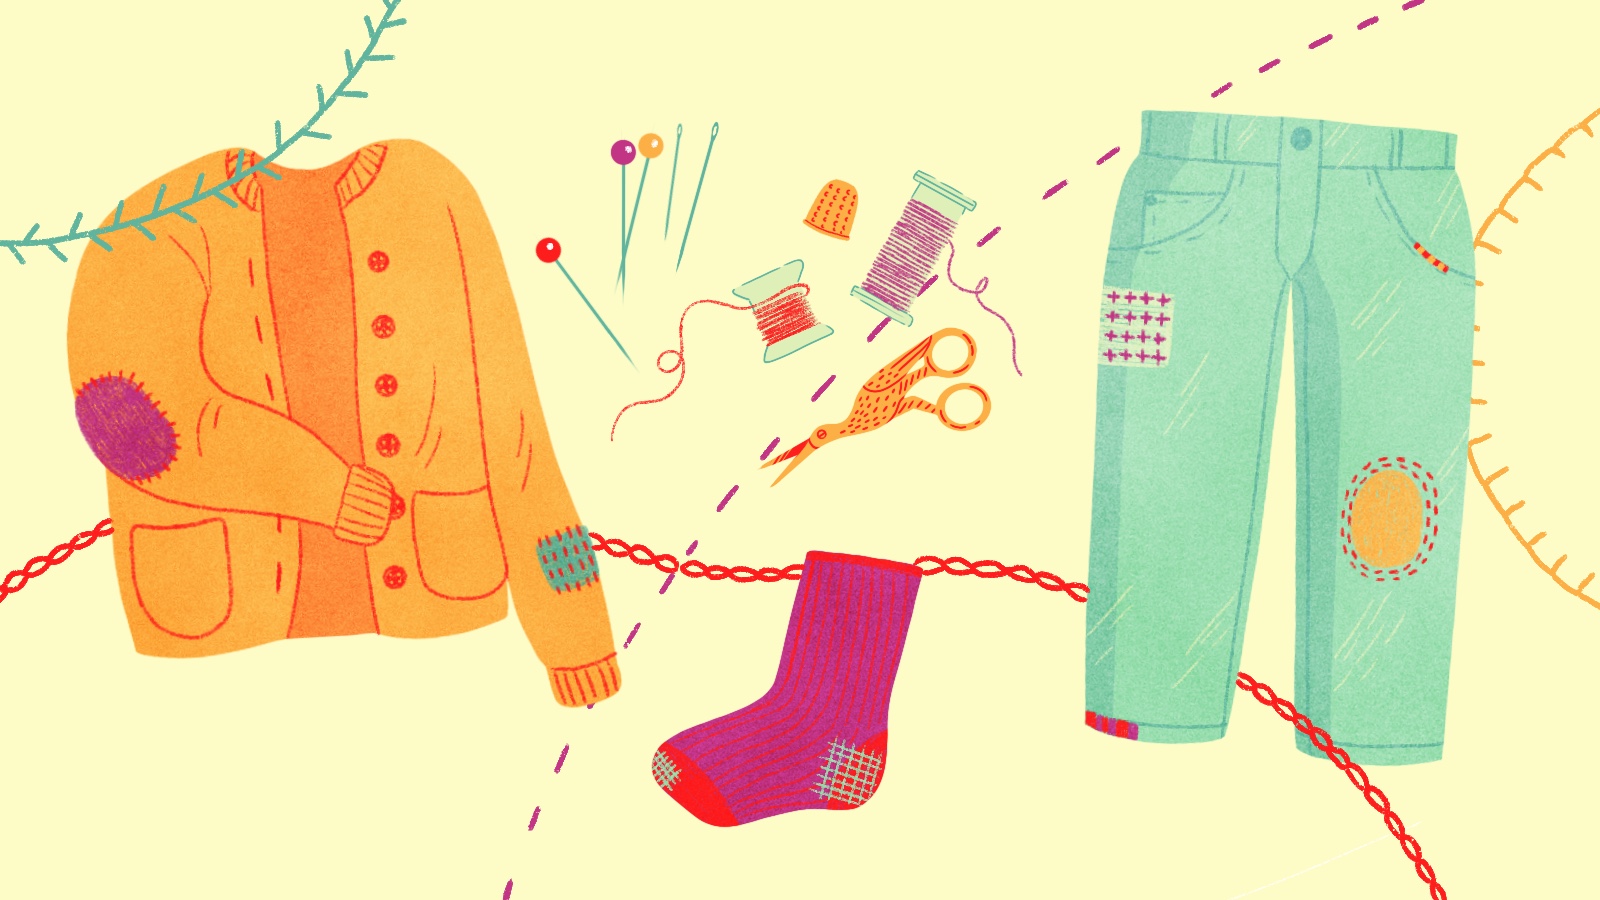 illustration of clothing with patches, thread, scissors, pins, and different stitches running across the image